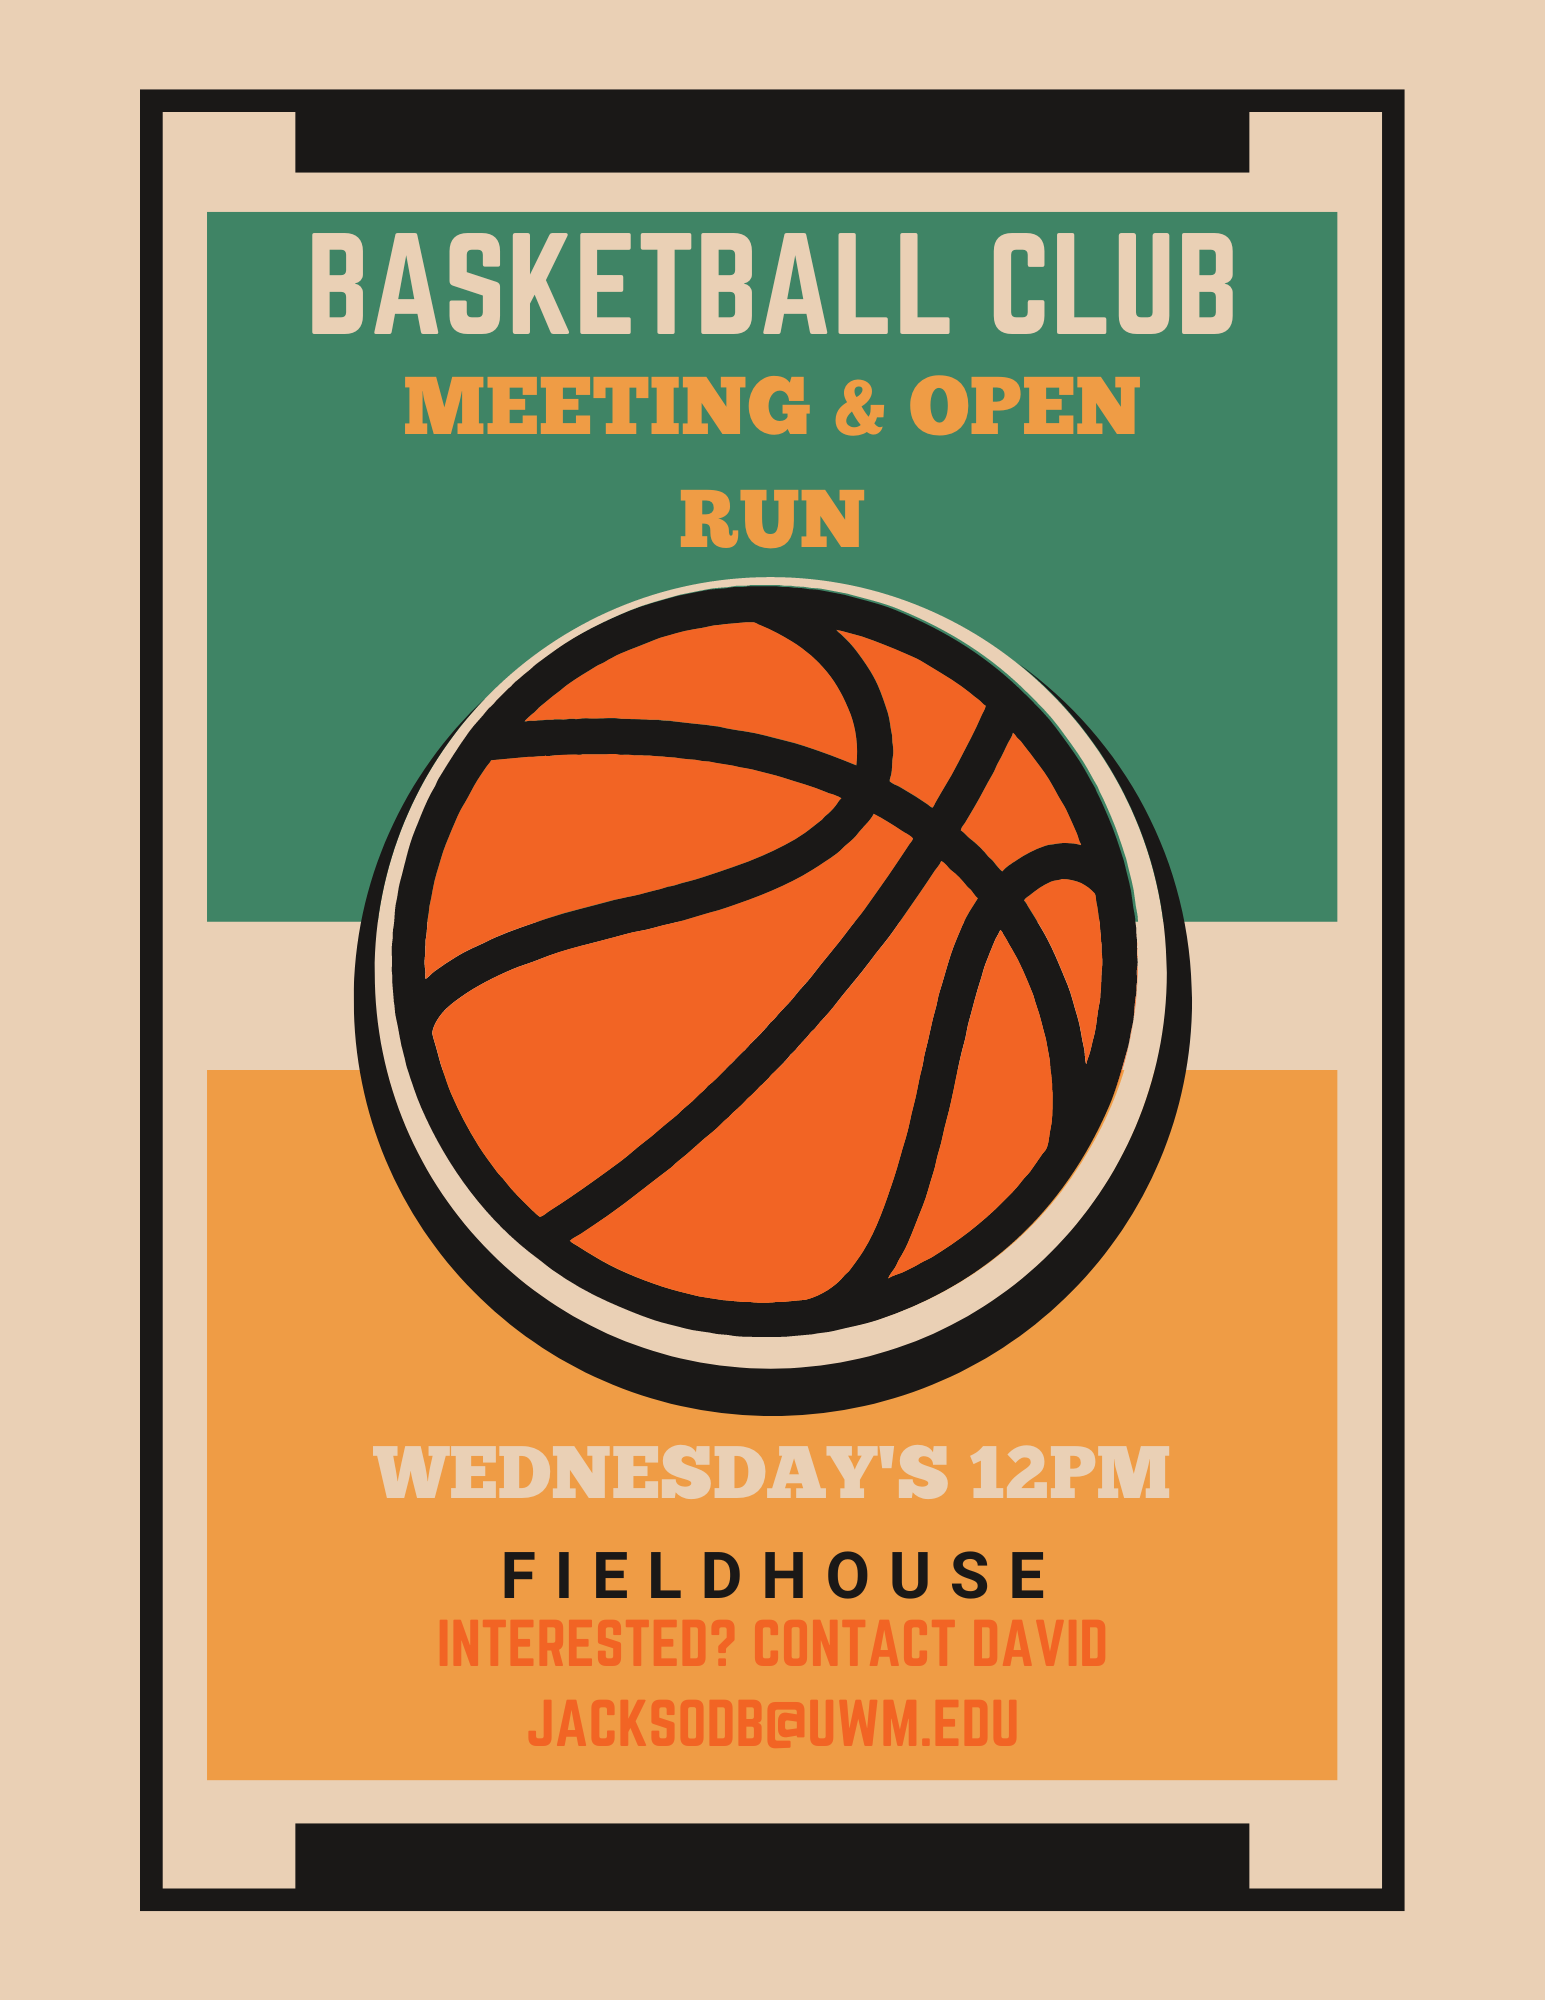 Details For Event 23673 – Basketball Club Meeting/Open Run